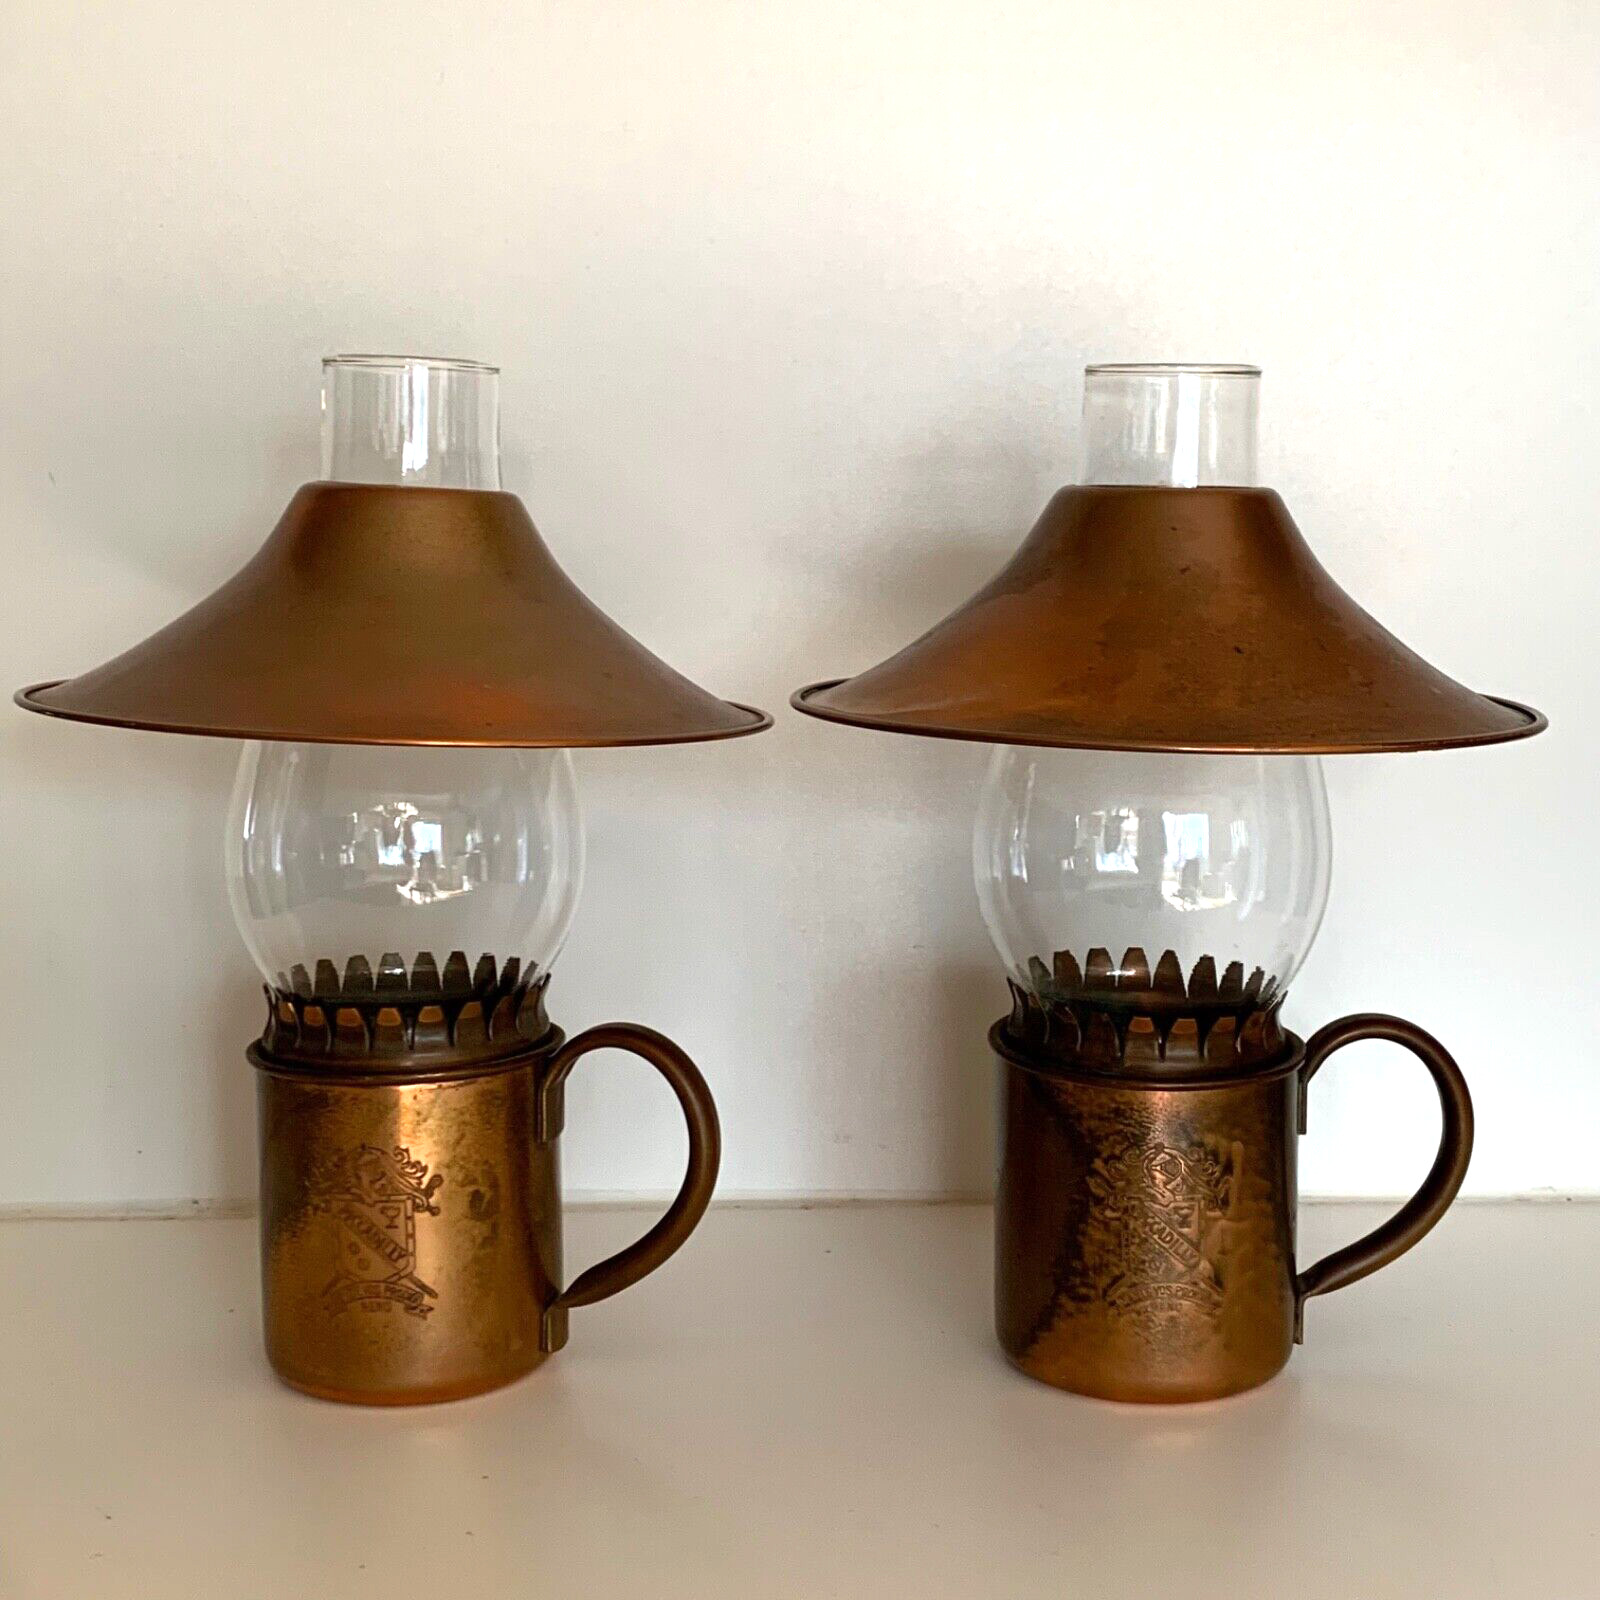 VTG 1946 Piccadilly Club Casino Solid Copper Oil Lamps Debuting Moscow Mule Mug